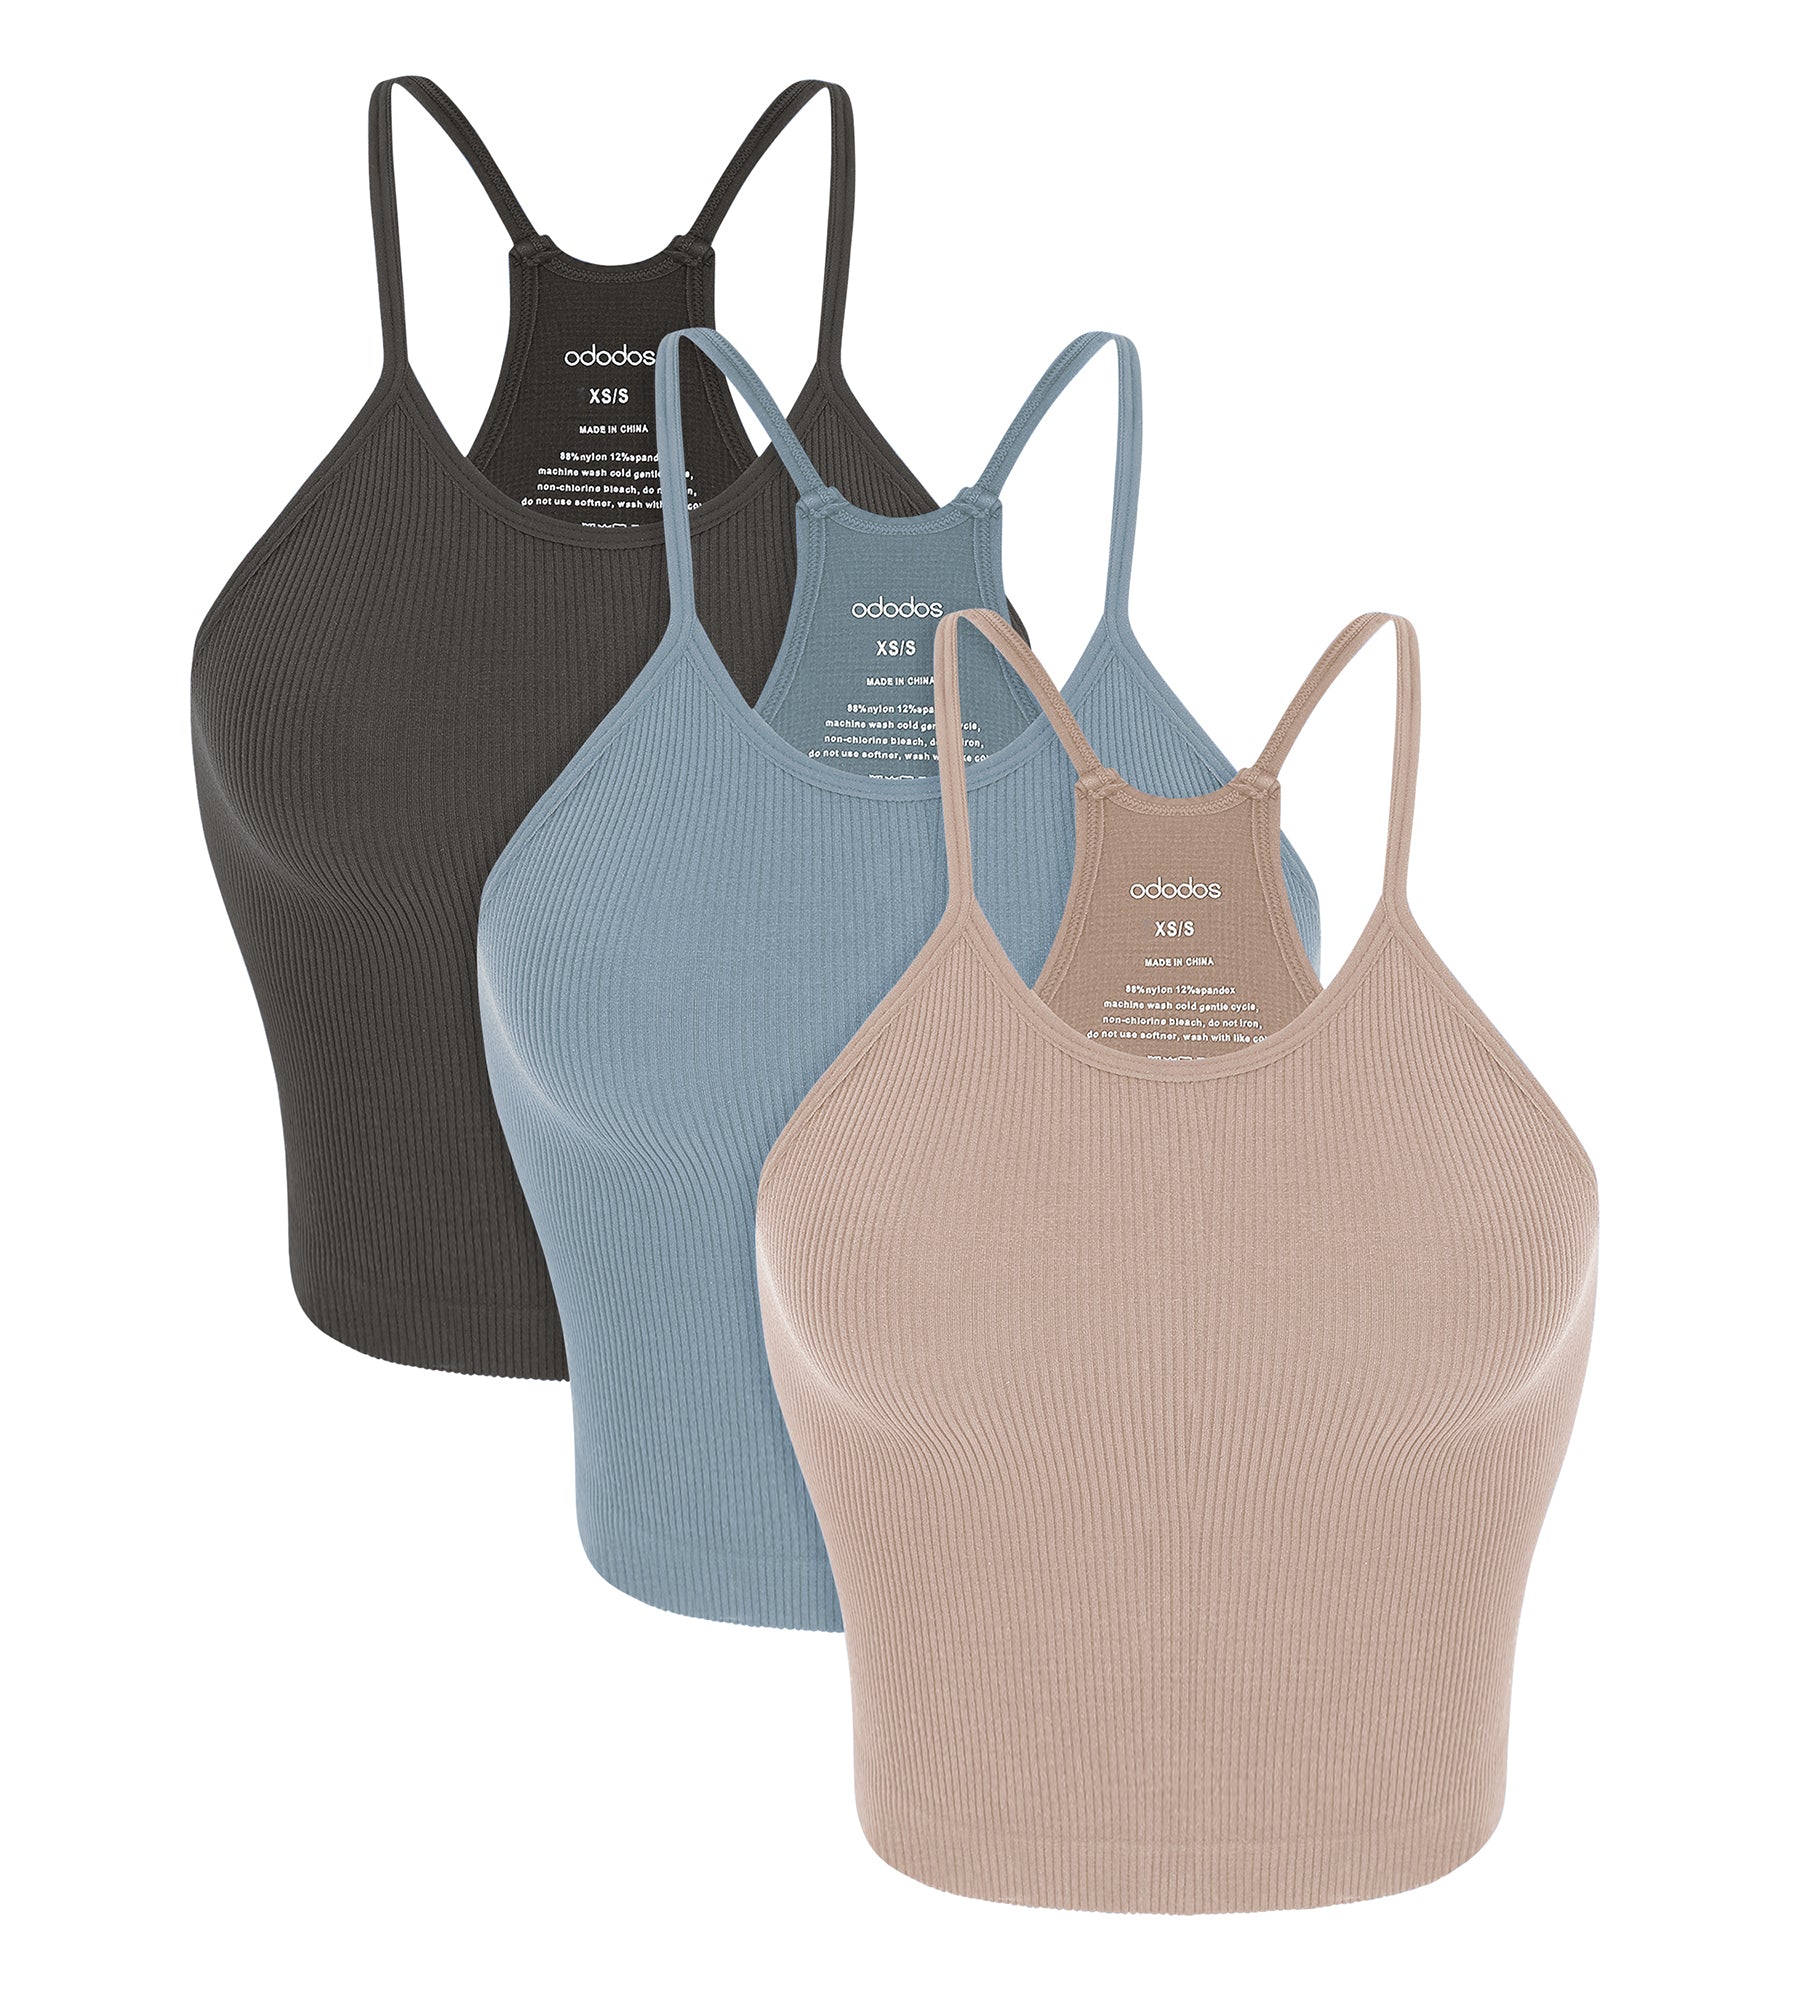 3-Pack Seamless Rib-Knit Camisole Charcoal+Dusty Blue+Bark - ododos